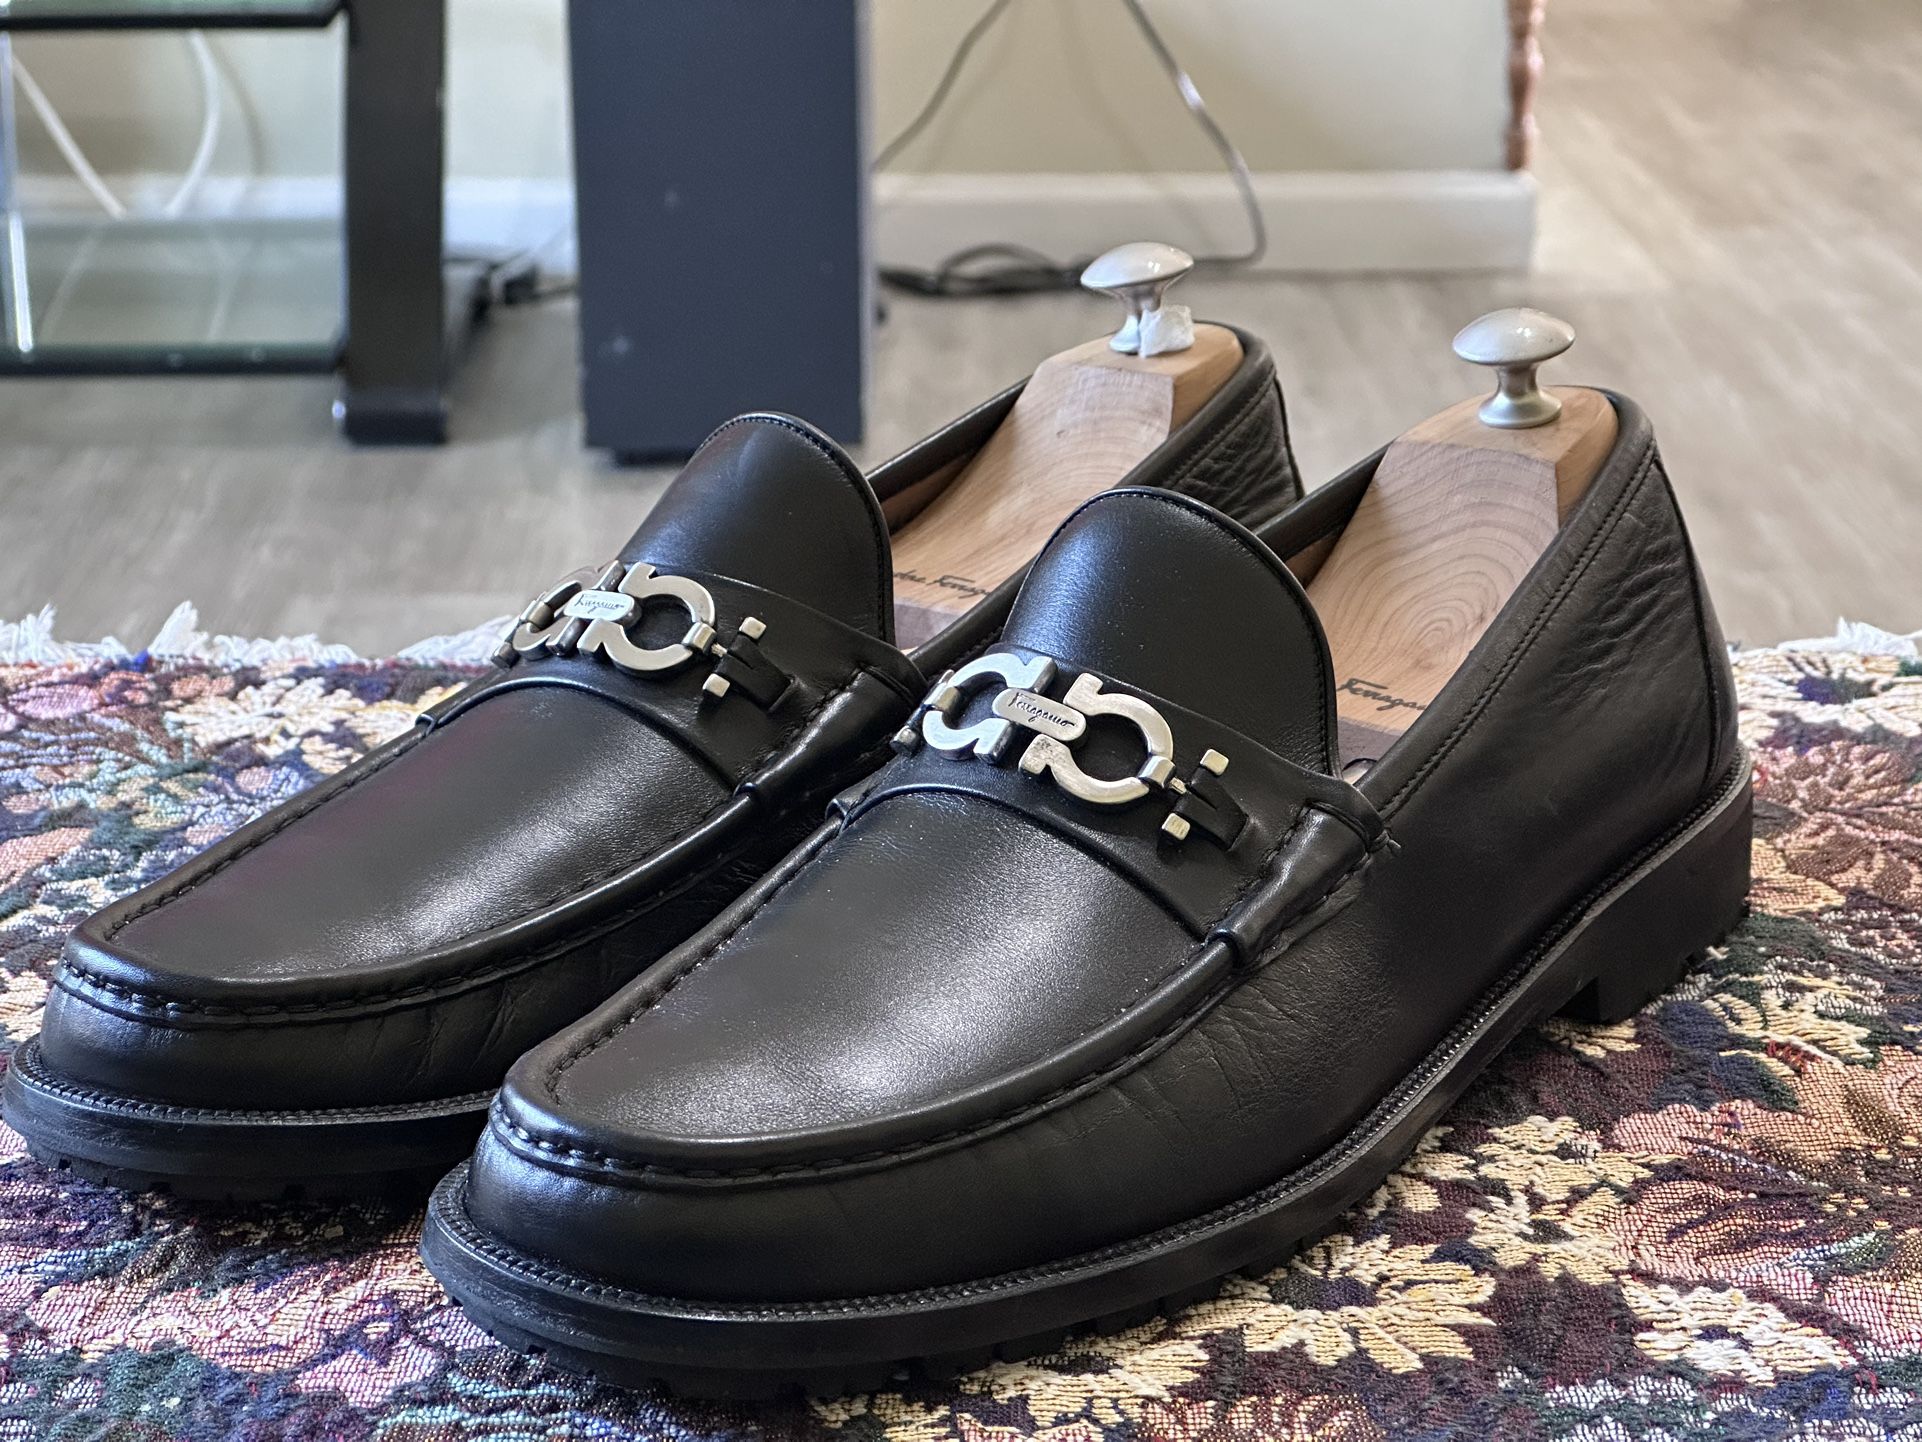 Rodeo Sightseeing Whirlpool Salvatore Ferragamo Master Gancini Horse Bit Men's Black Leather Loafers  Size 13 B for Sale in South Portland, ME - OfferUp